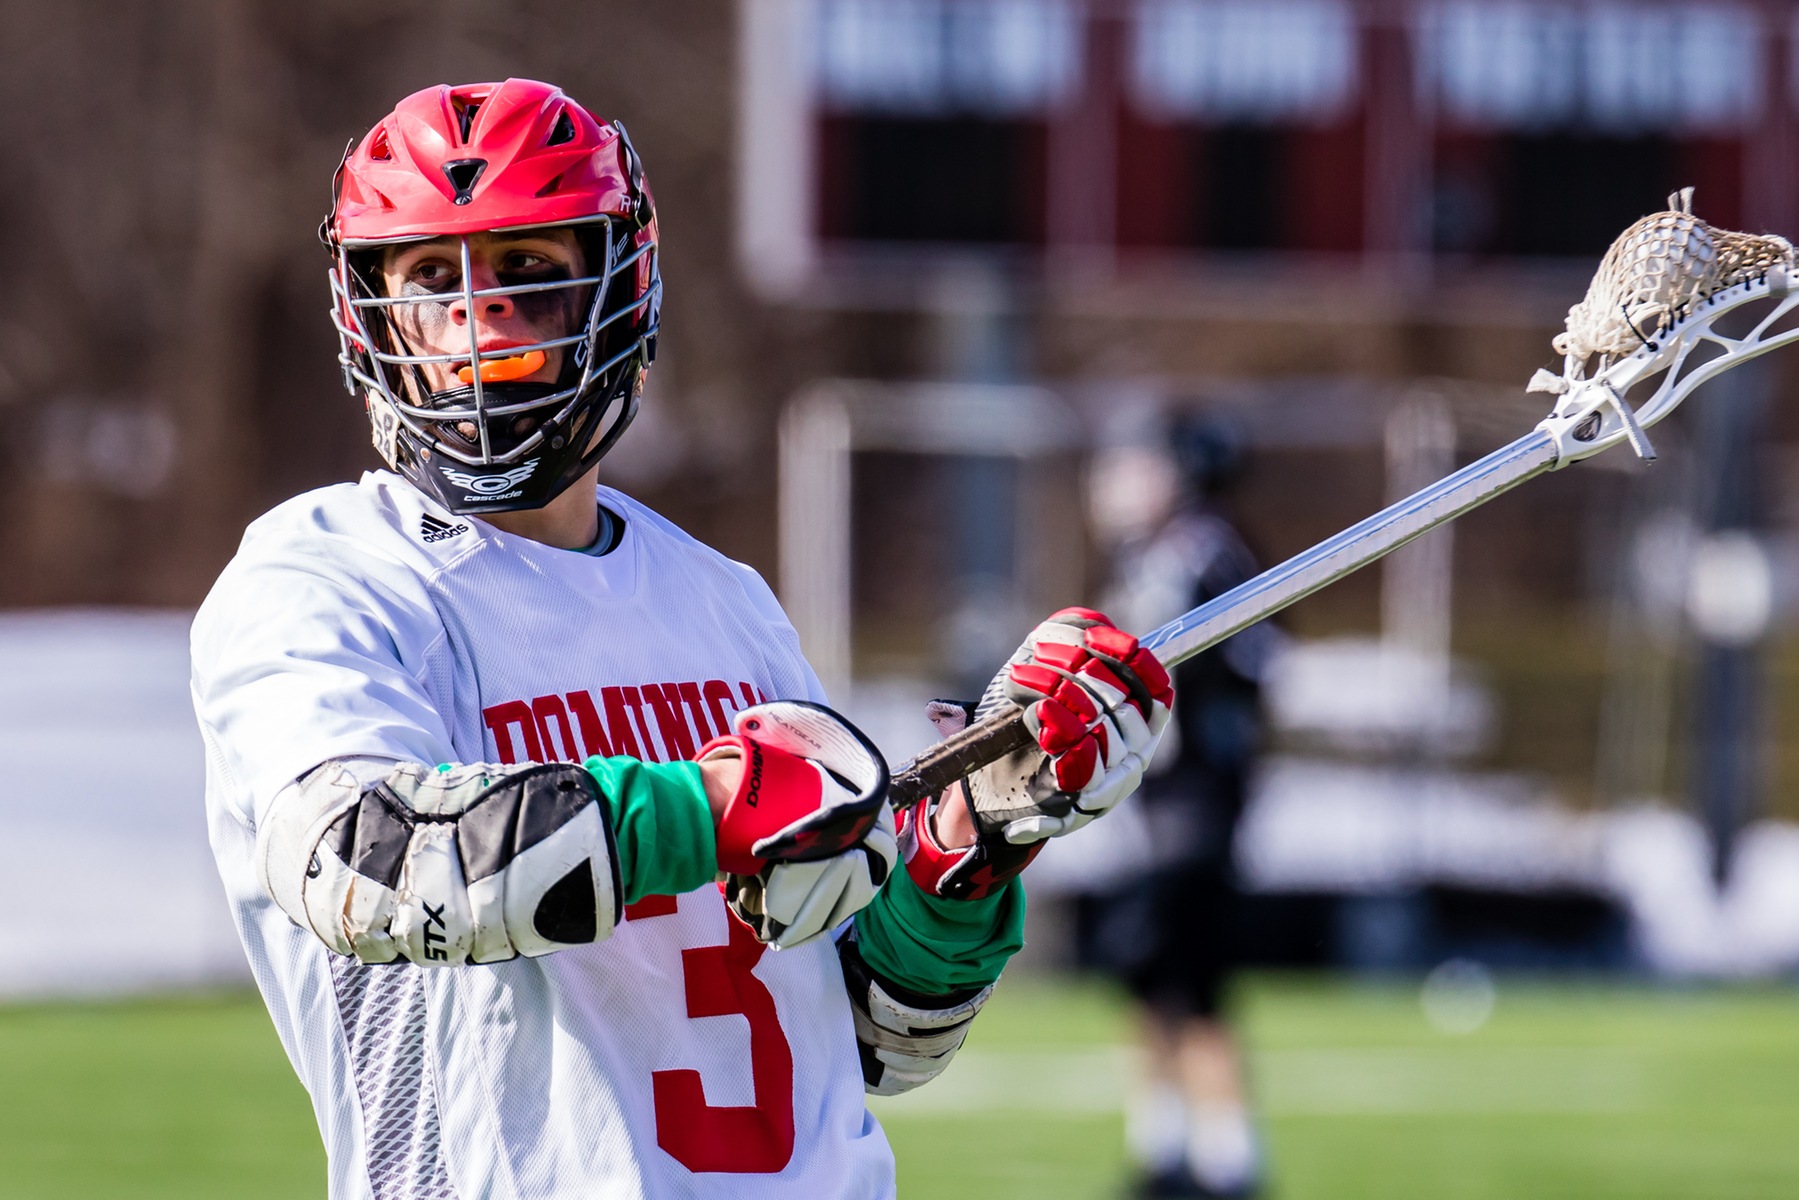 Late rally not enough as men's lacrosse fall to St. Joe's (L.I.)